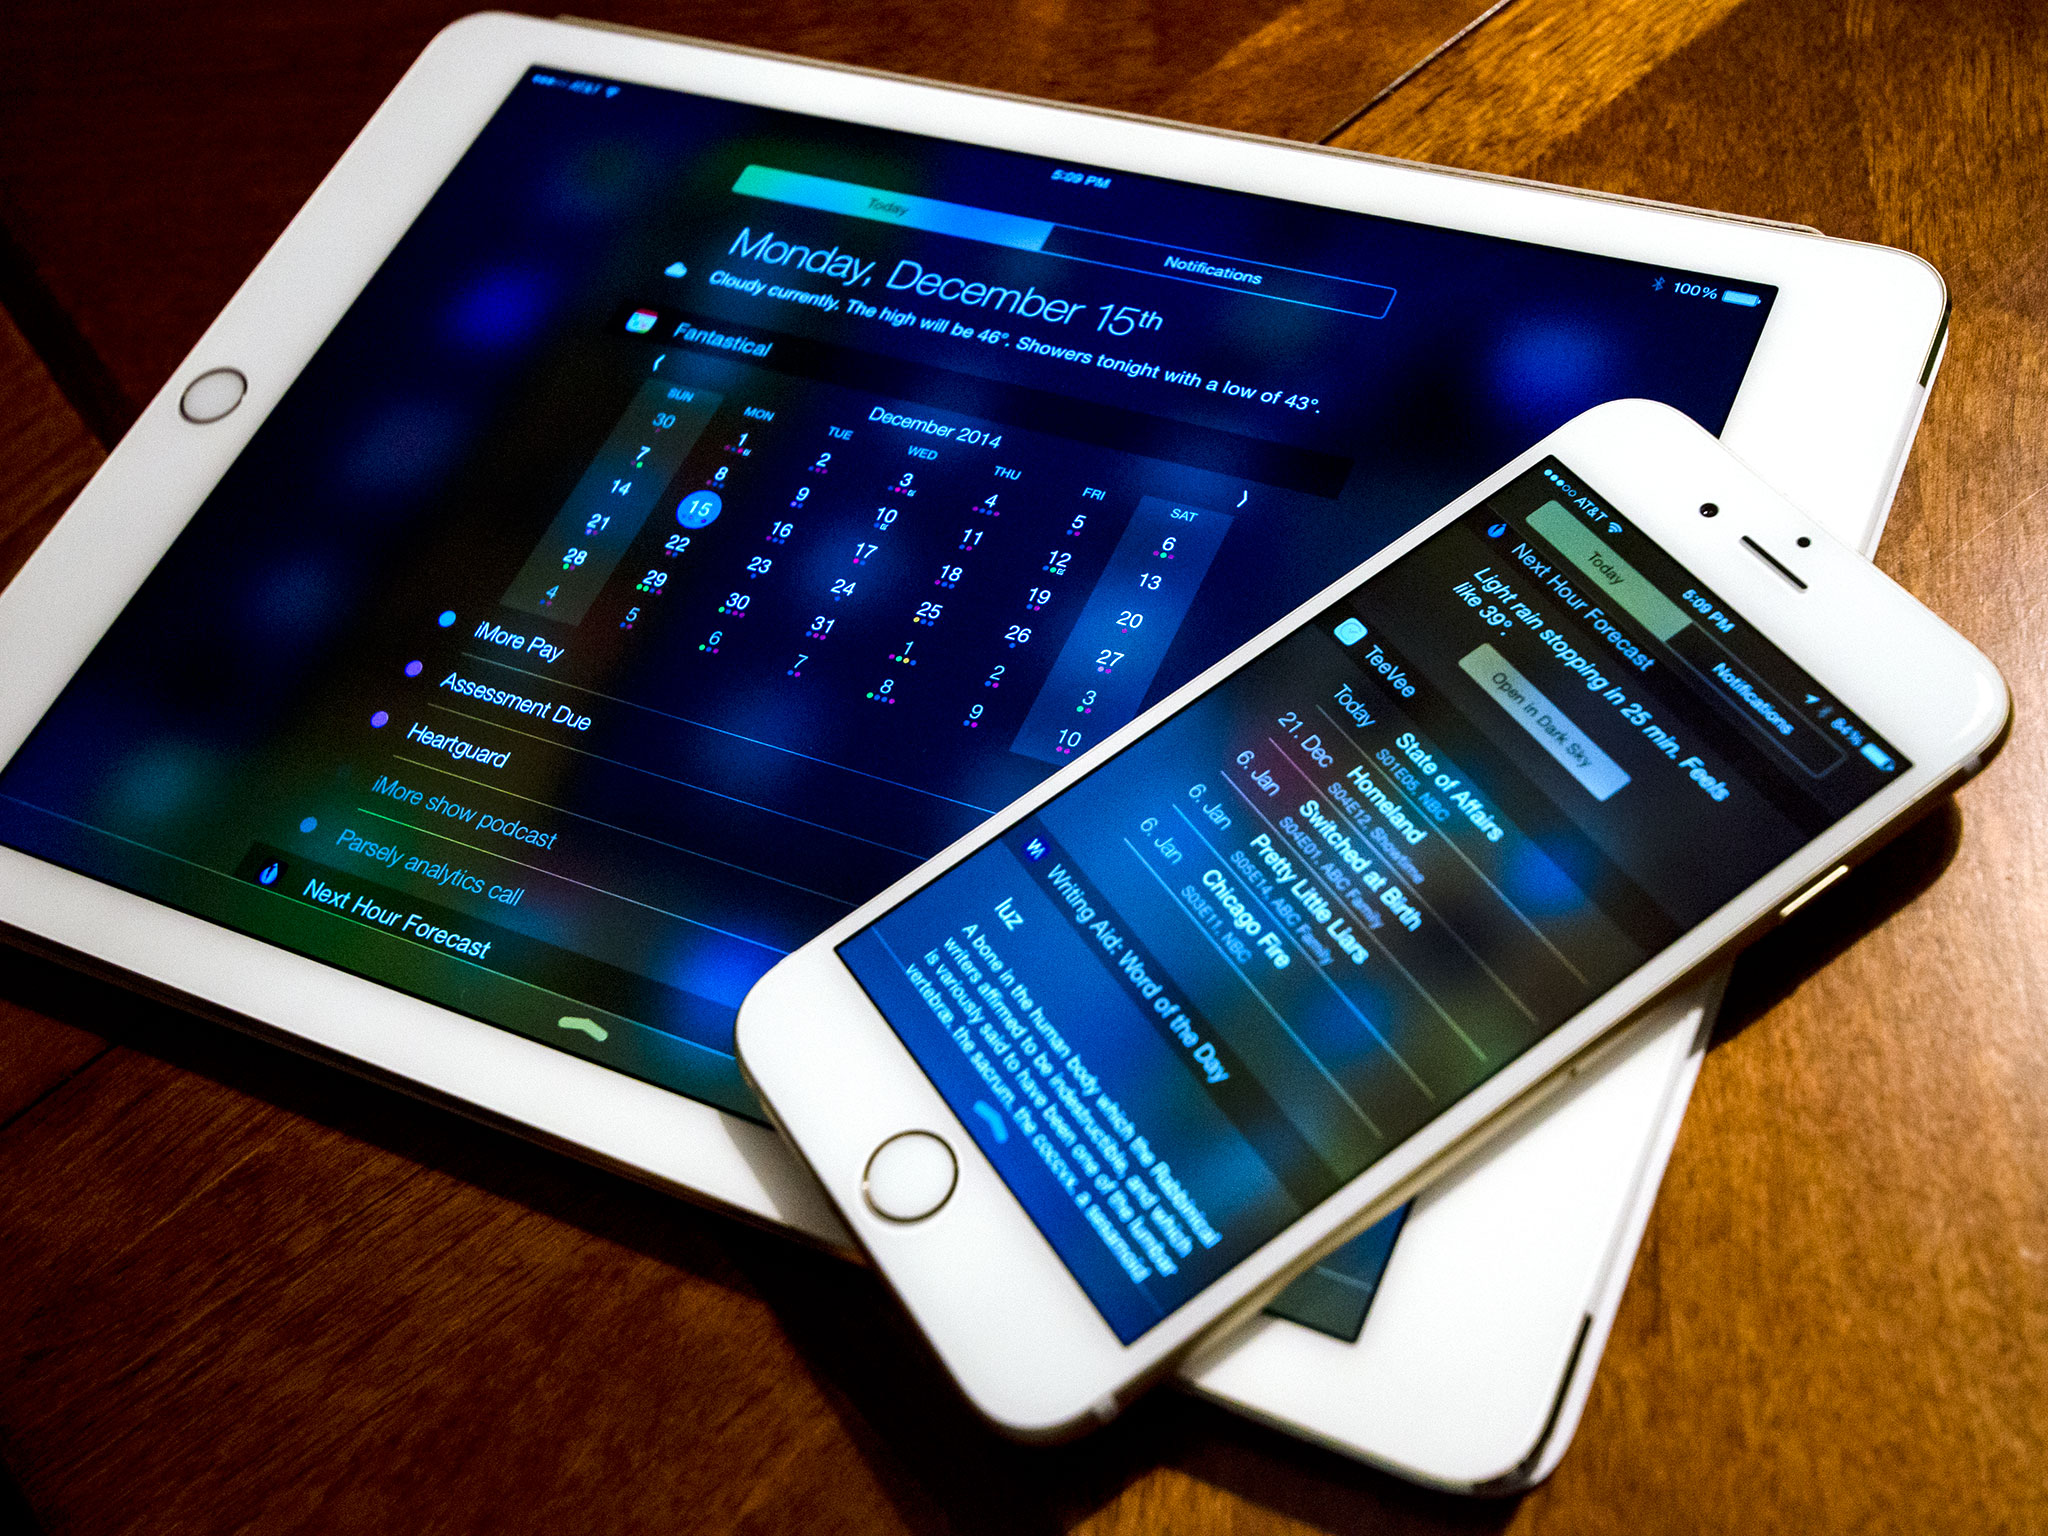 Best apps with Notification Center widgets for iOS 8: All the things at a glance!